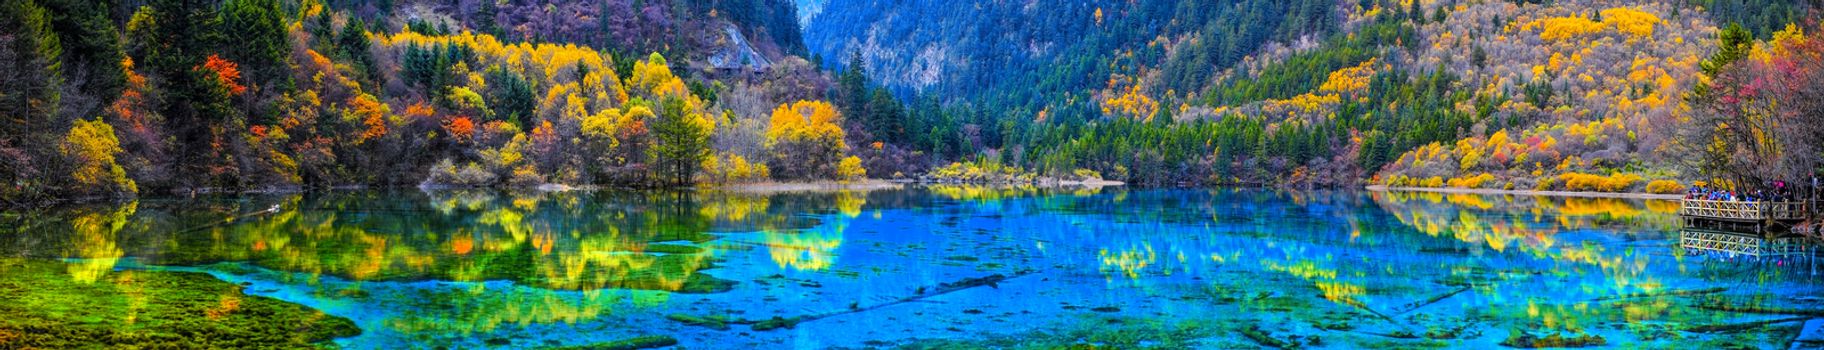 Panorama view of crystal clear water of the Five Flower Lake (Multicolored Lake) among autumn woods in  Jiuzhaigou nature (Jiuzhai Valley National Park), China.